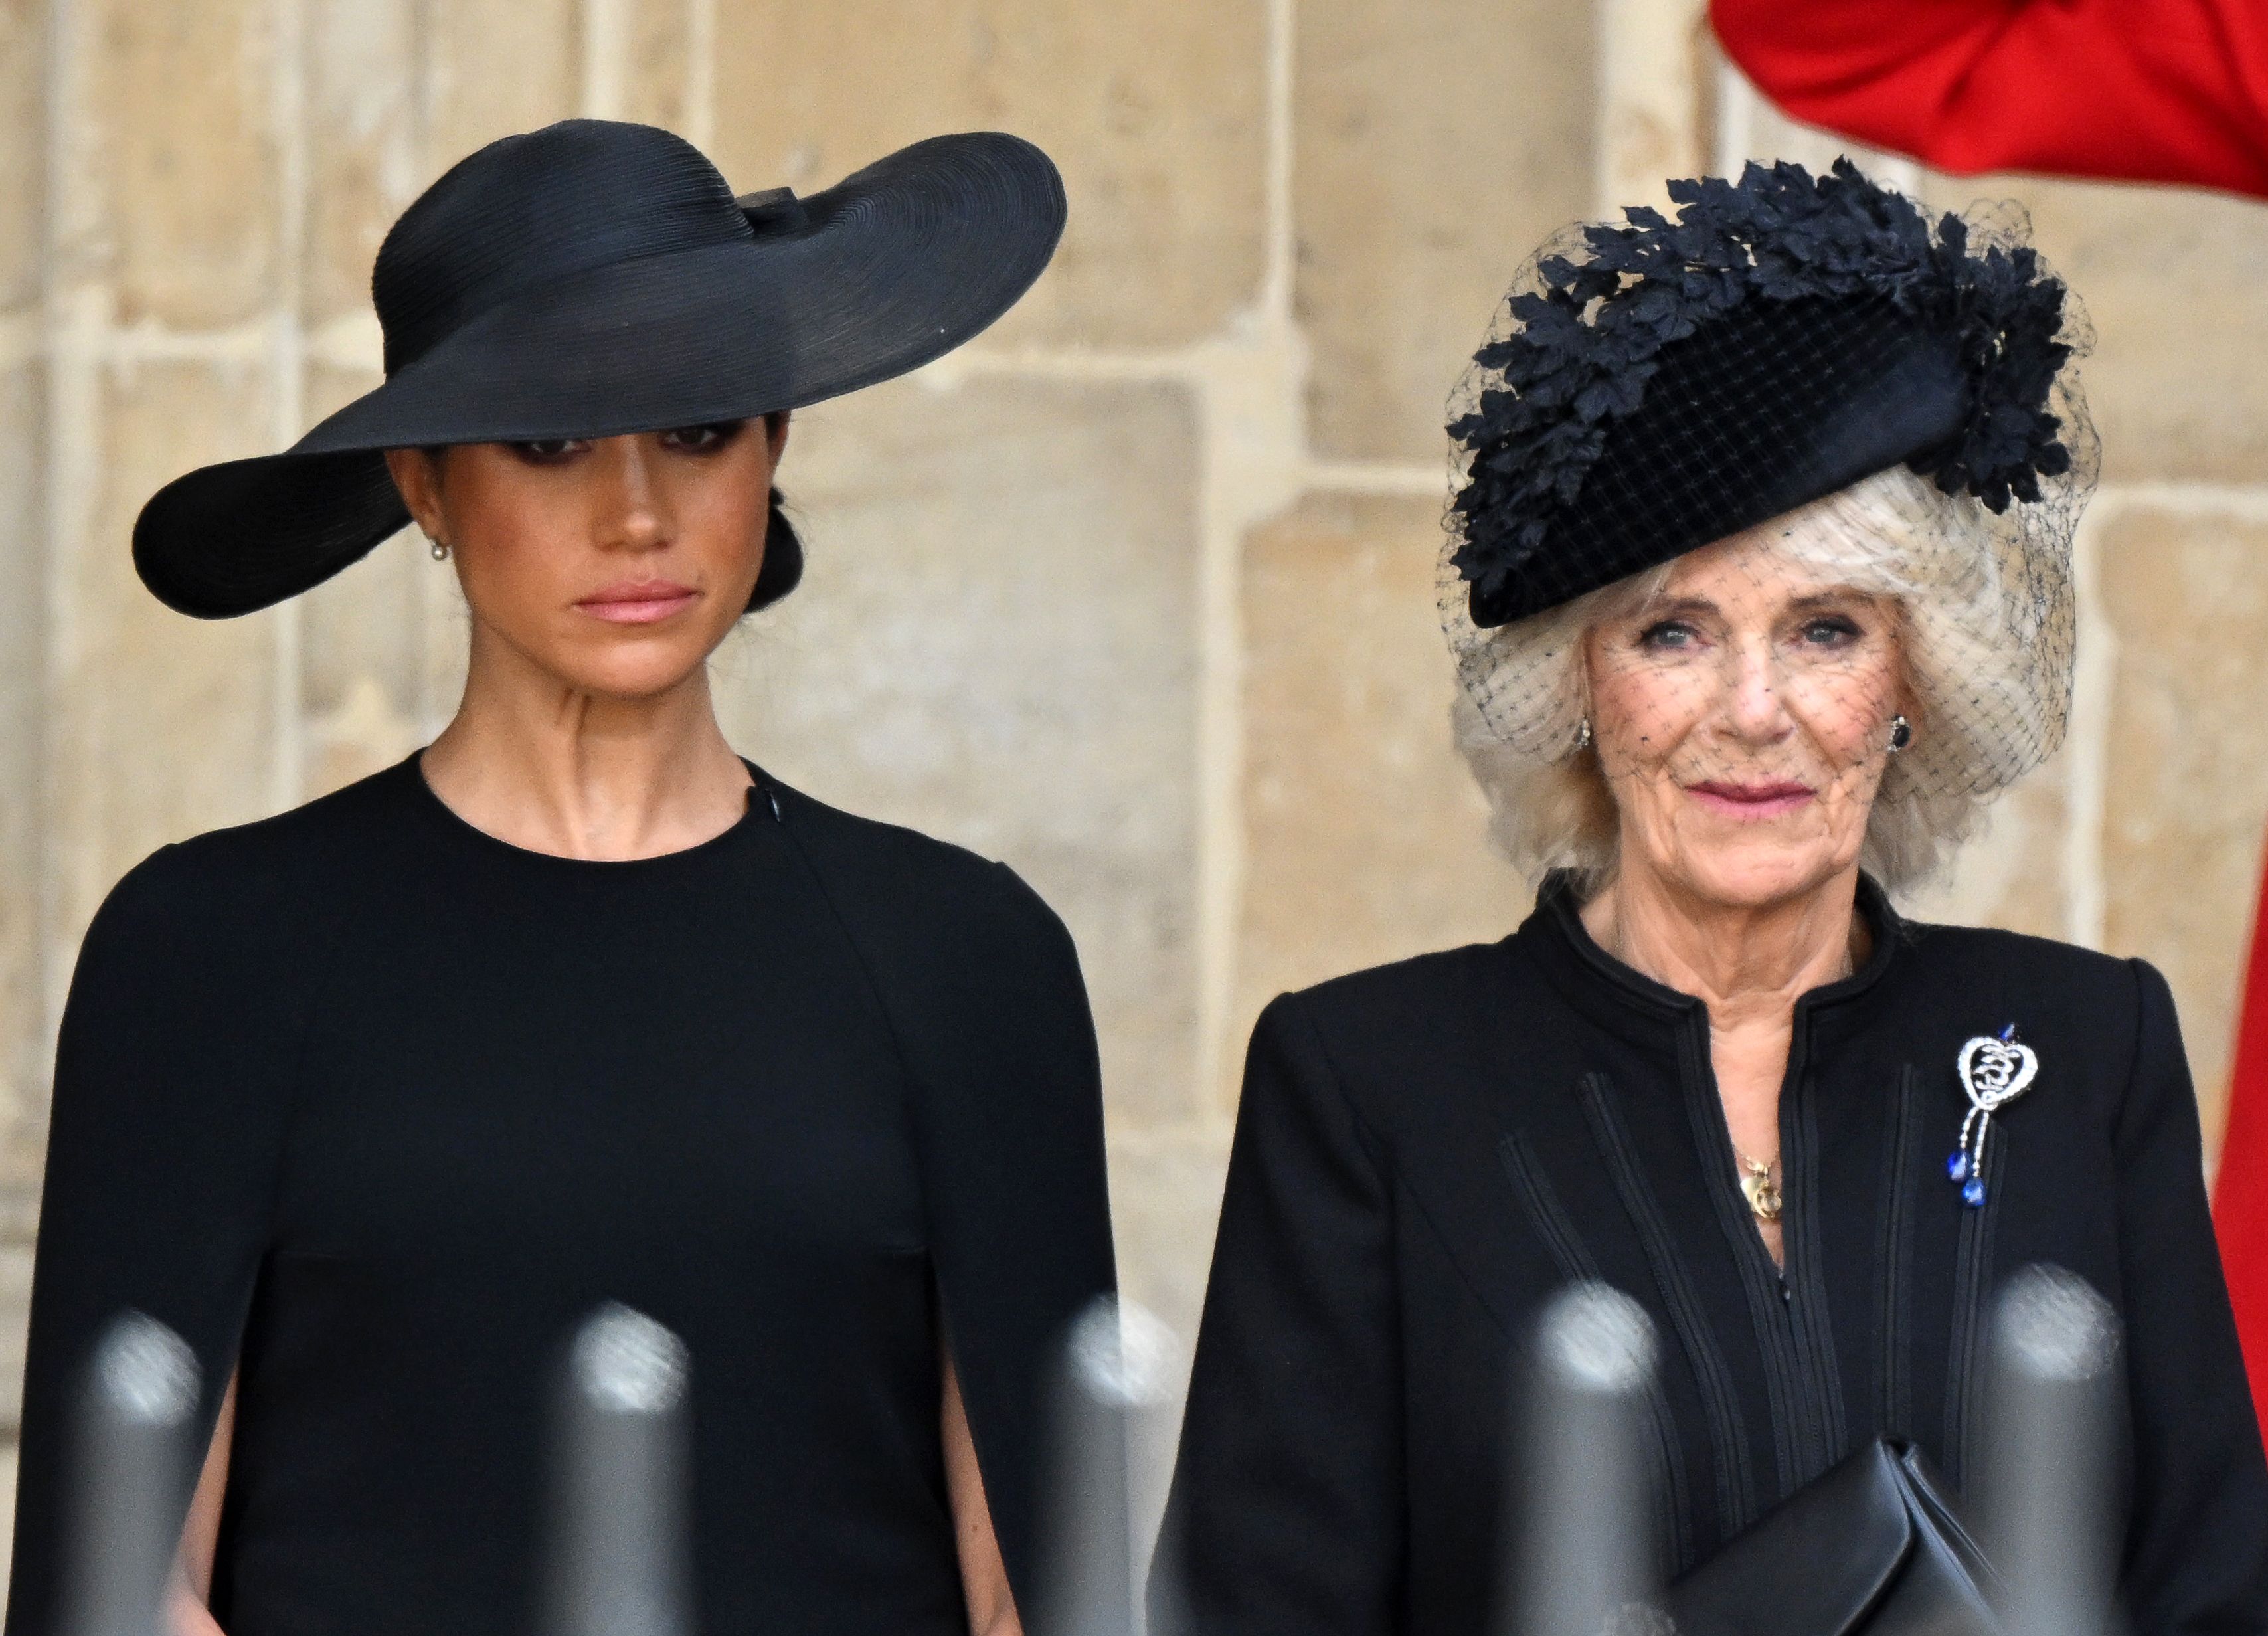 <p>Duchess Meghan and Camilla, Queen Consort watched as the coffin of Queen Elizabeth II left <a href="https://www.wonderwall.com/celebrity/royals/best-photos-from-queen-elizabeth-ii-funeral-king-charles-princes-william-prince-harry-george-charlotte-kate-meghan652347.gallery">her funeral</a> at London's Westminster Abbey on Sept. 19, 2022.</p>